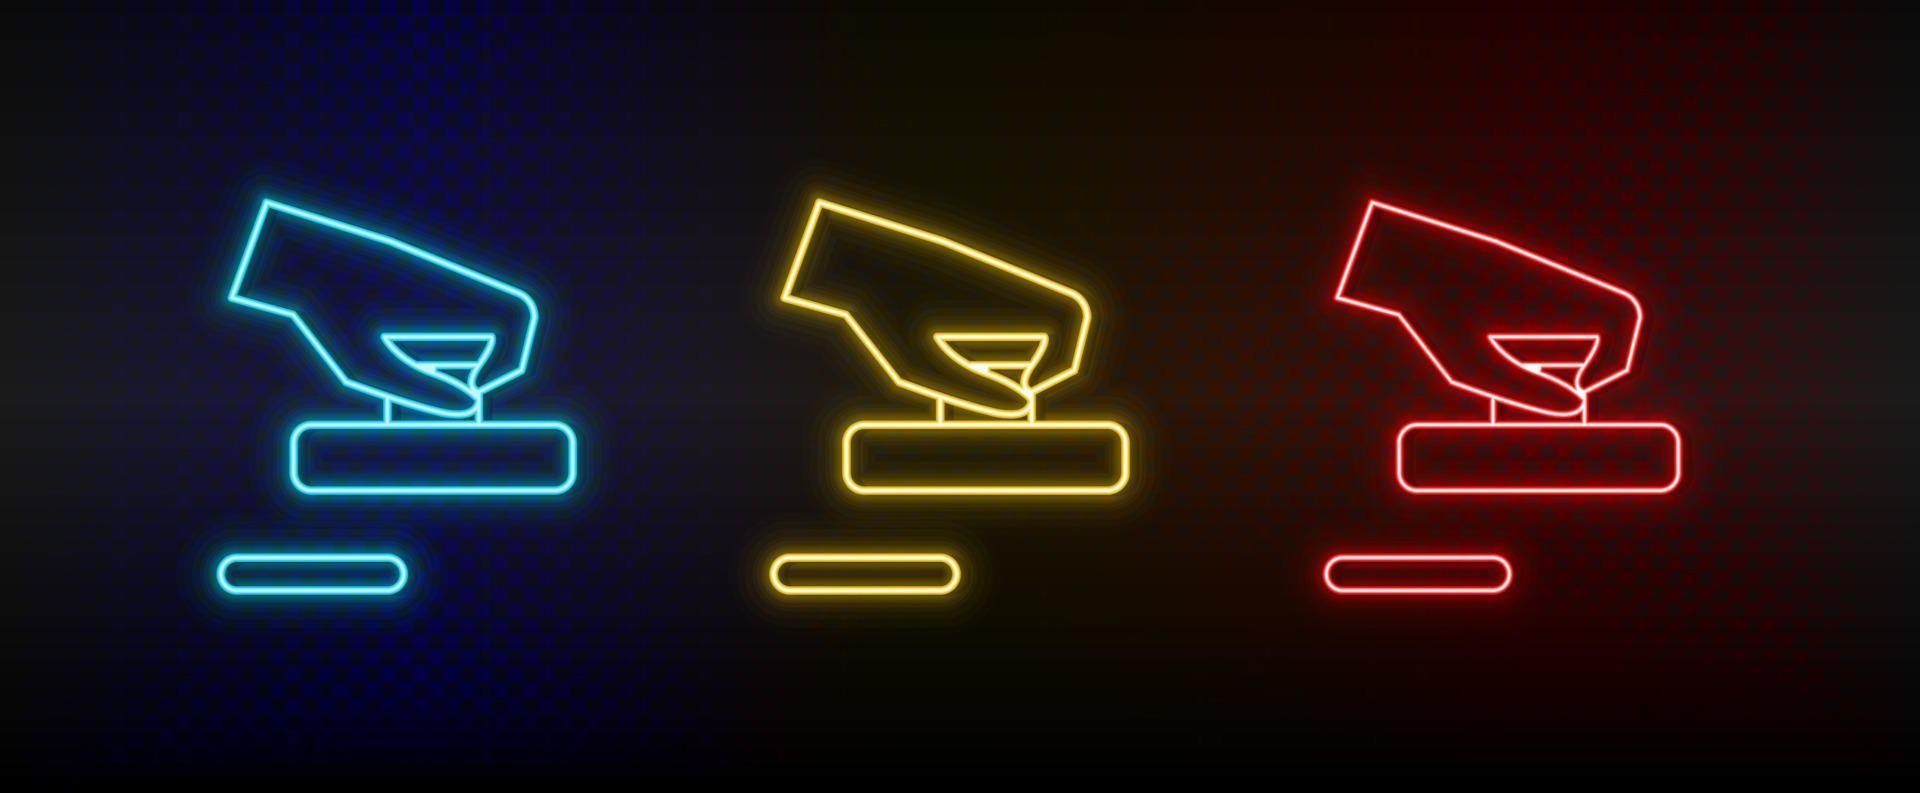 Neon icons. Air hockey board game hand. Set of red, blue, yellow neon vector icon on darken background